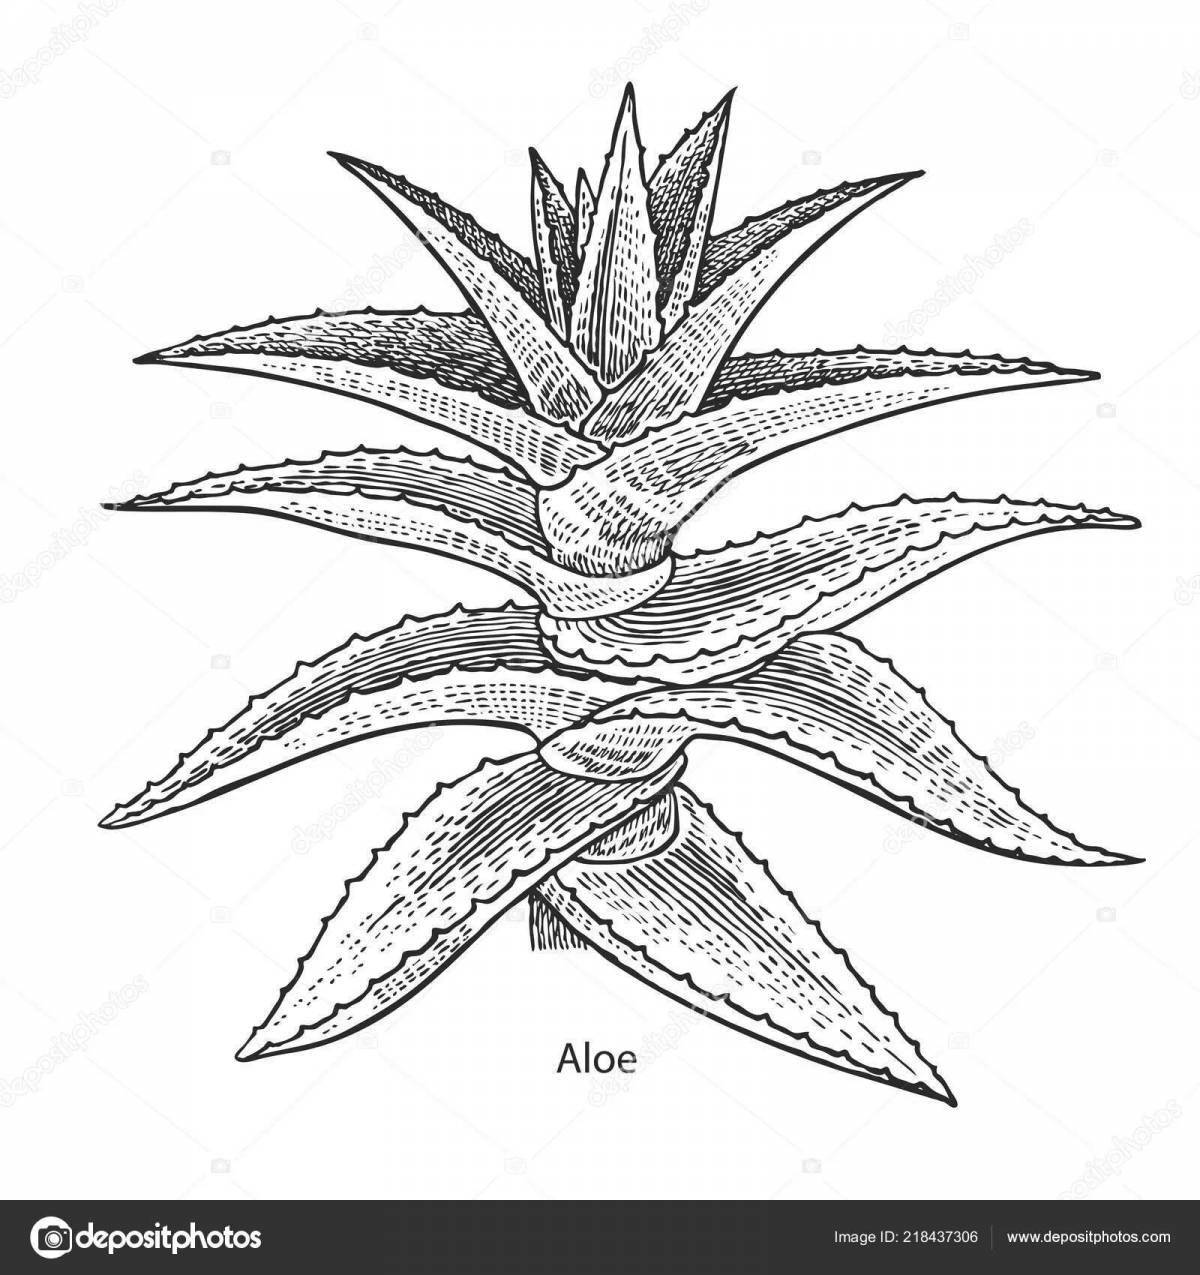 Exquisite aloe coloring book for students